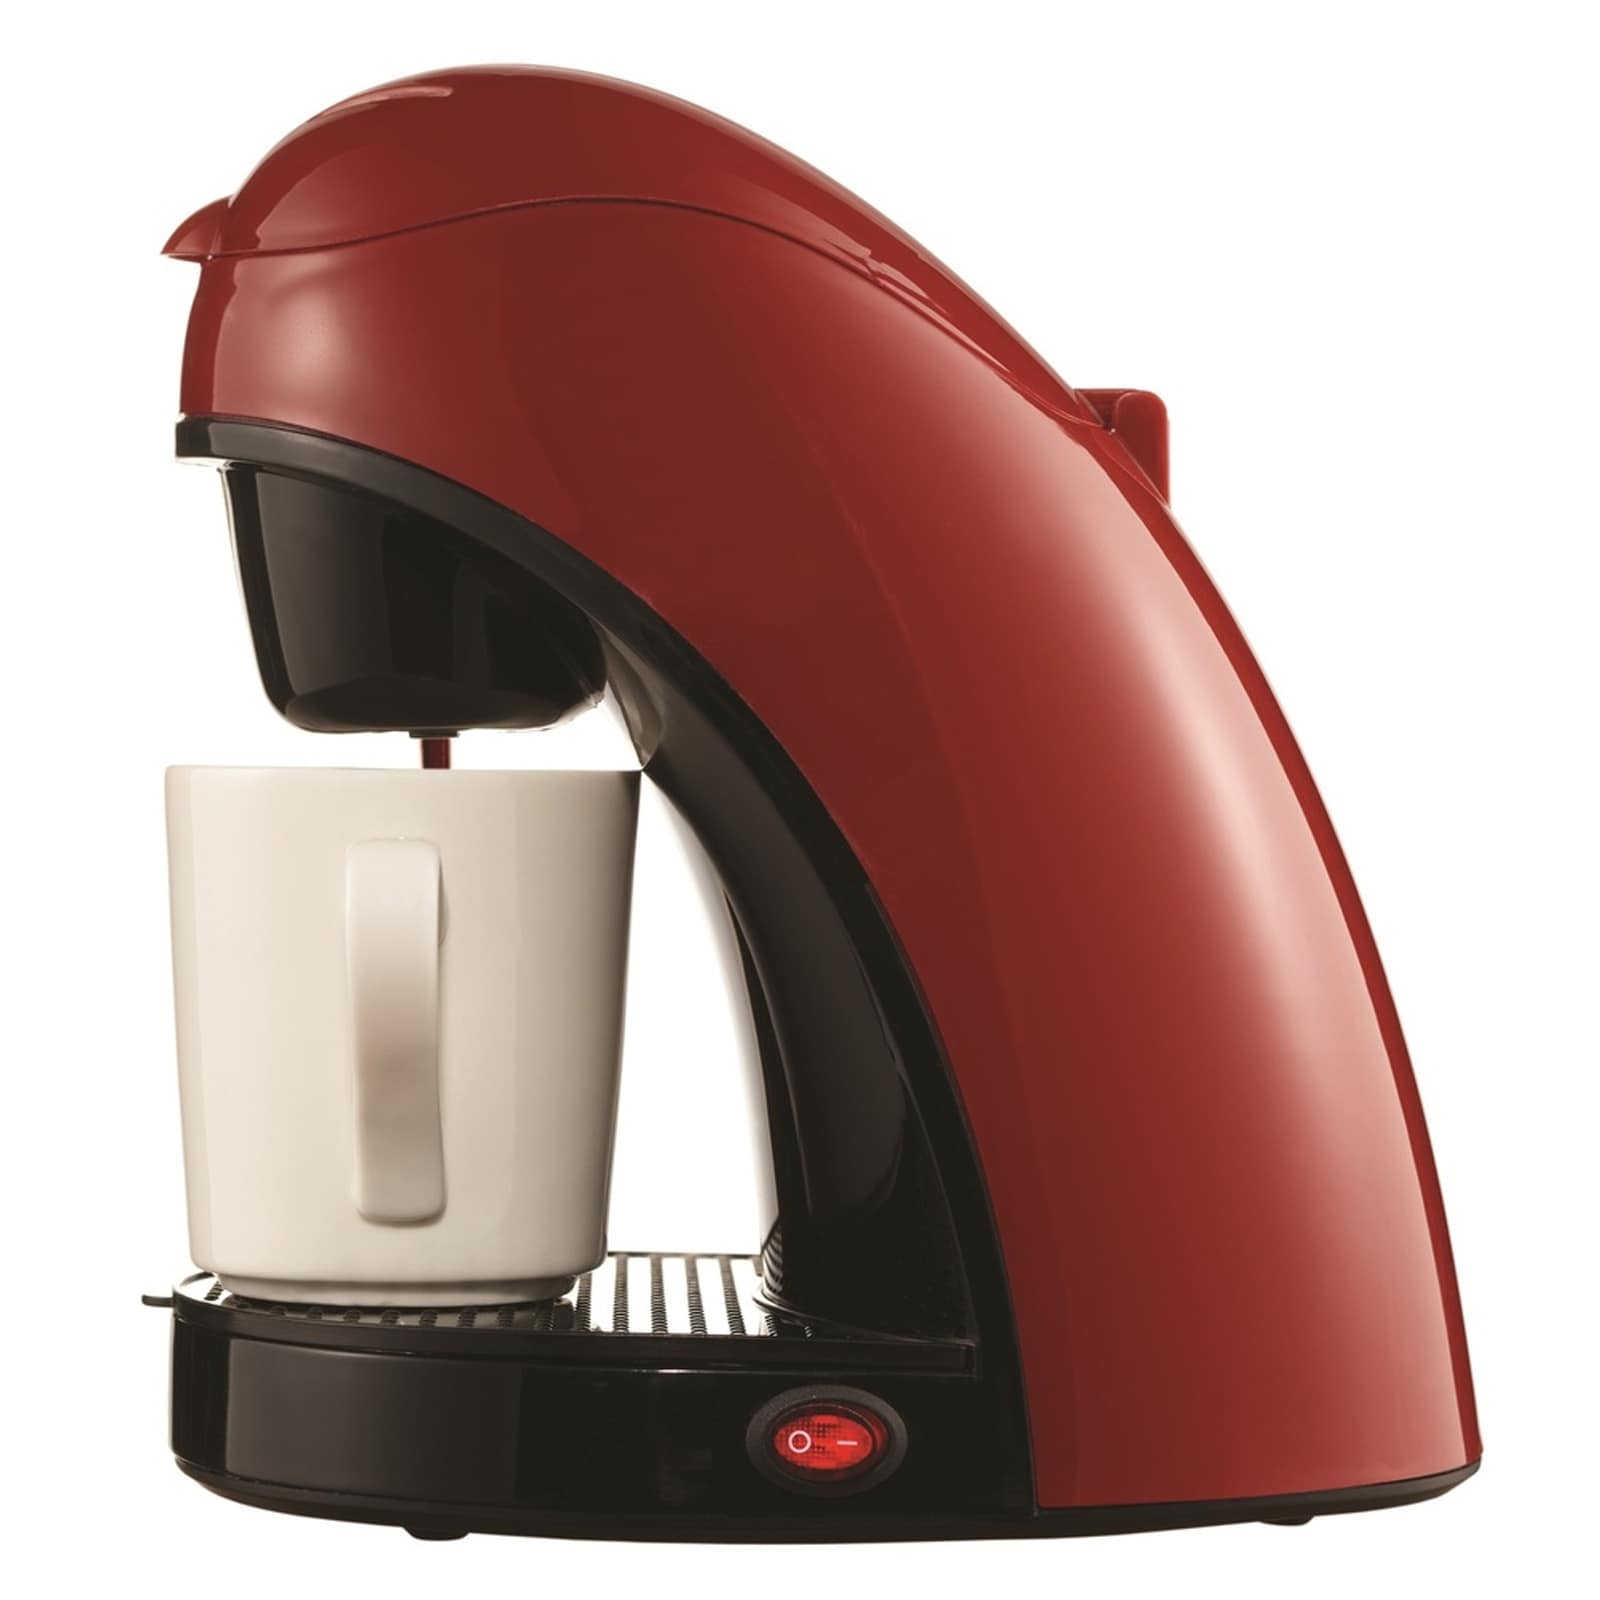 https://ak1.ostkcdn.com/images/products/is/images/direct/9023a3f92ff77b03f91cfc202bbdf817ce34cfcb/Brentwood-Single-Cup-Coffee-Maker-Red.jpg